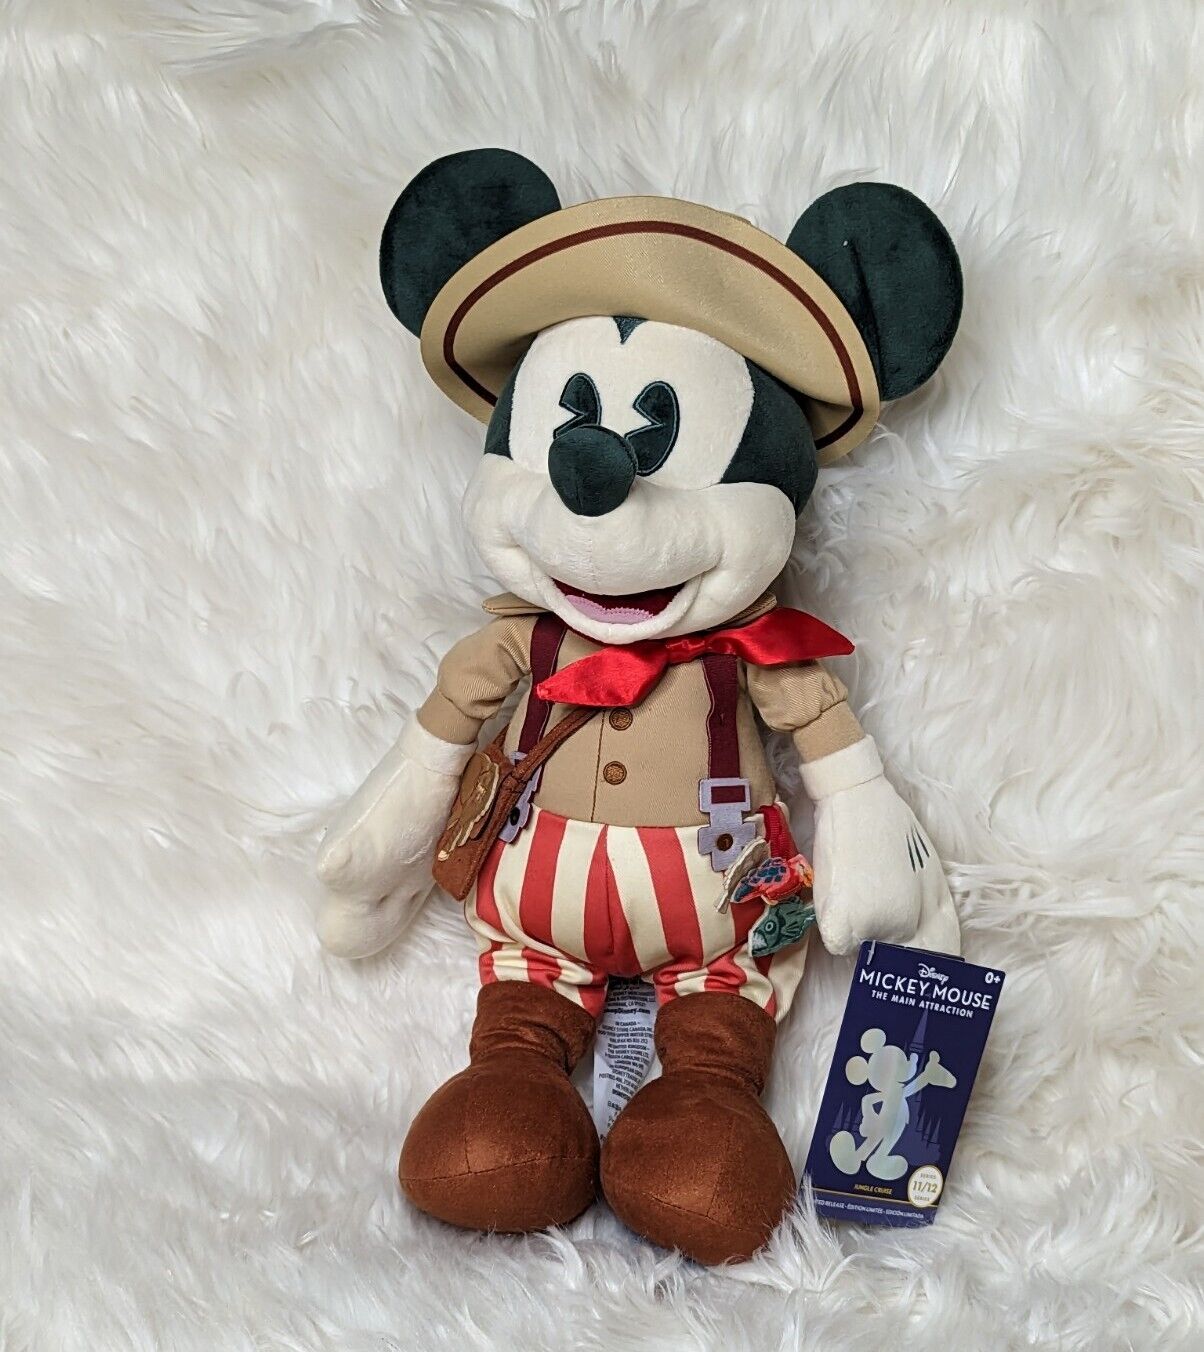 Disney Mickey Mouse The Main Attraction Jungle Cruise Series 11/12 Plush New 